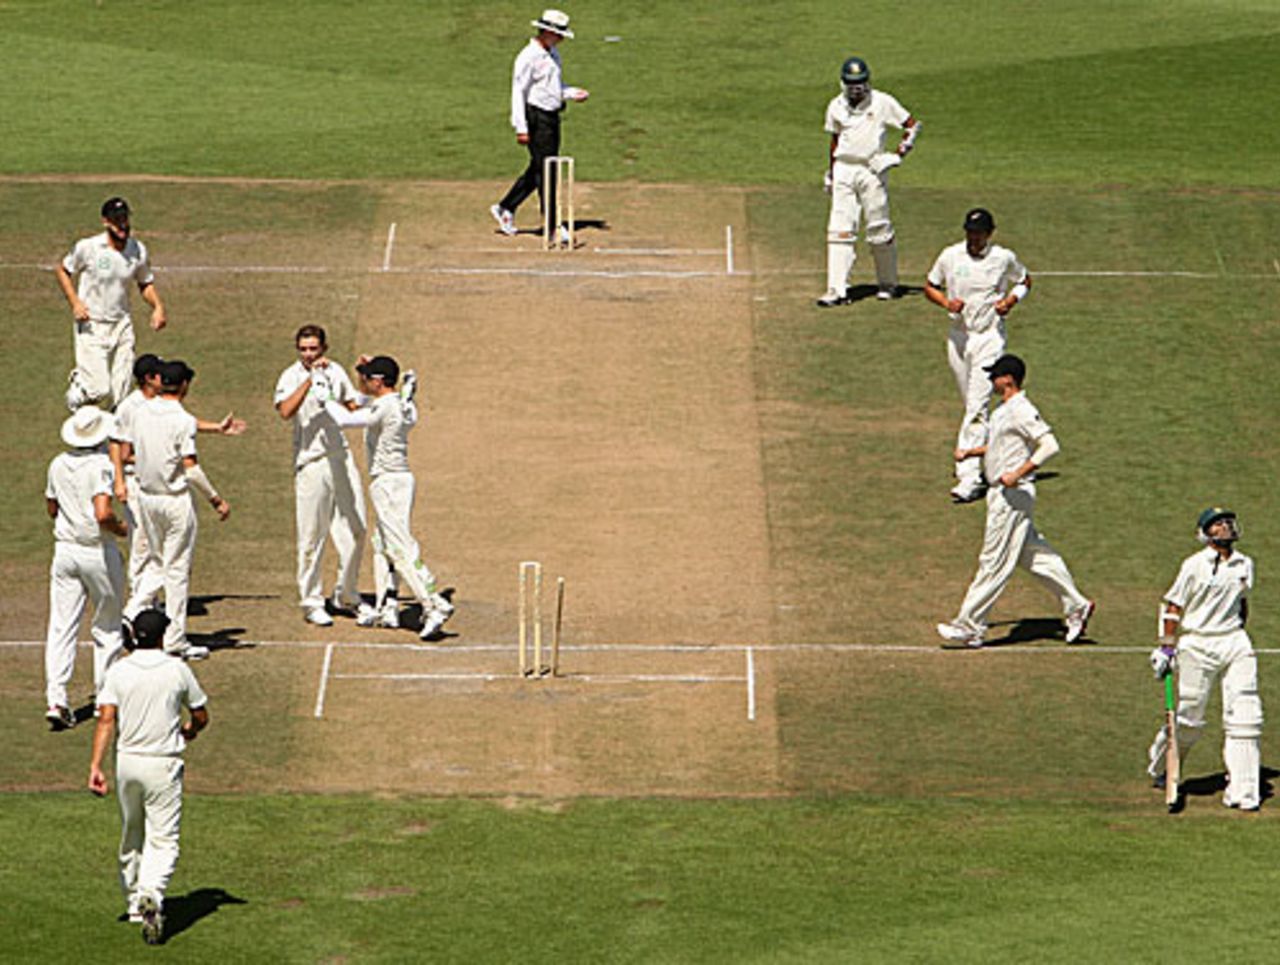 Shakib Al Hasan walks back after being bowled by Tim Southee, New Zealand v Bangladesh, only Test, Hamilton, 5th day, February 19, 2010